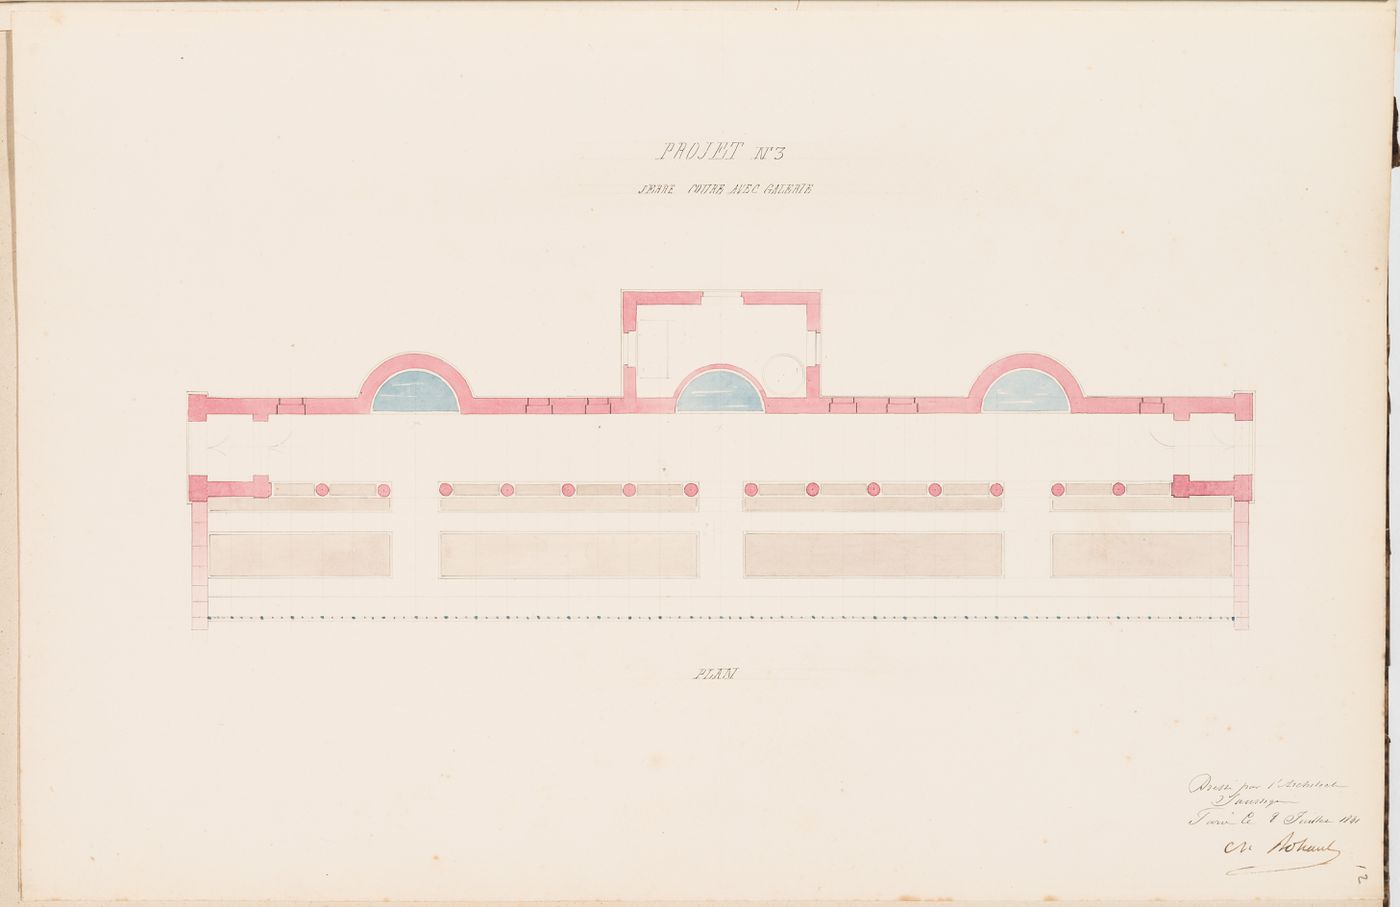 Plan for a "serre chaude" with a curved glass roof and a gallery for Monsieur Fauquet-Lemaitre